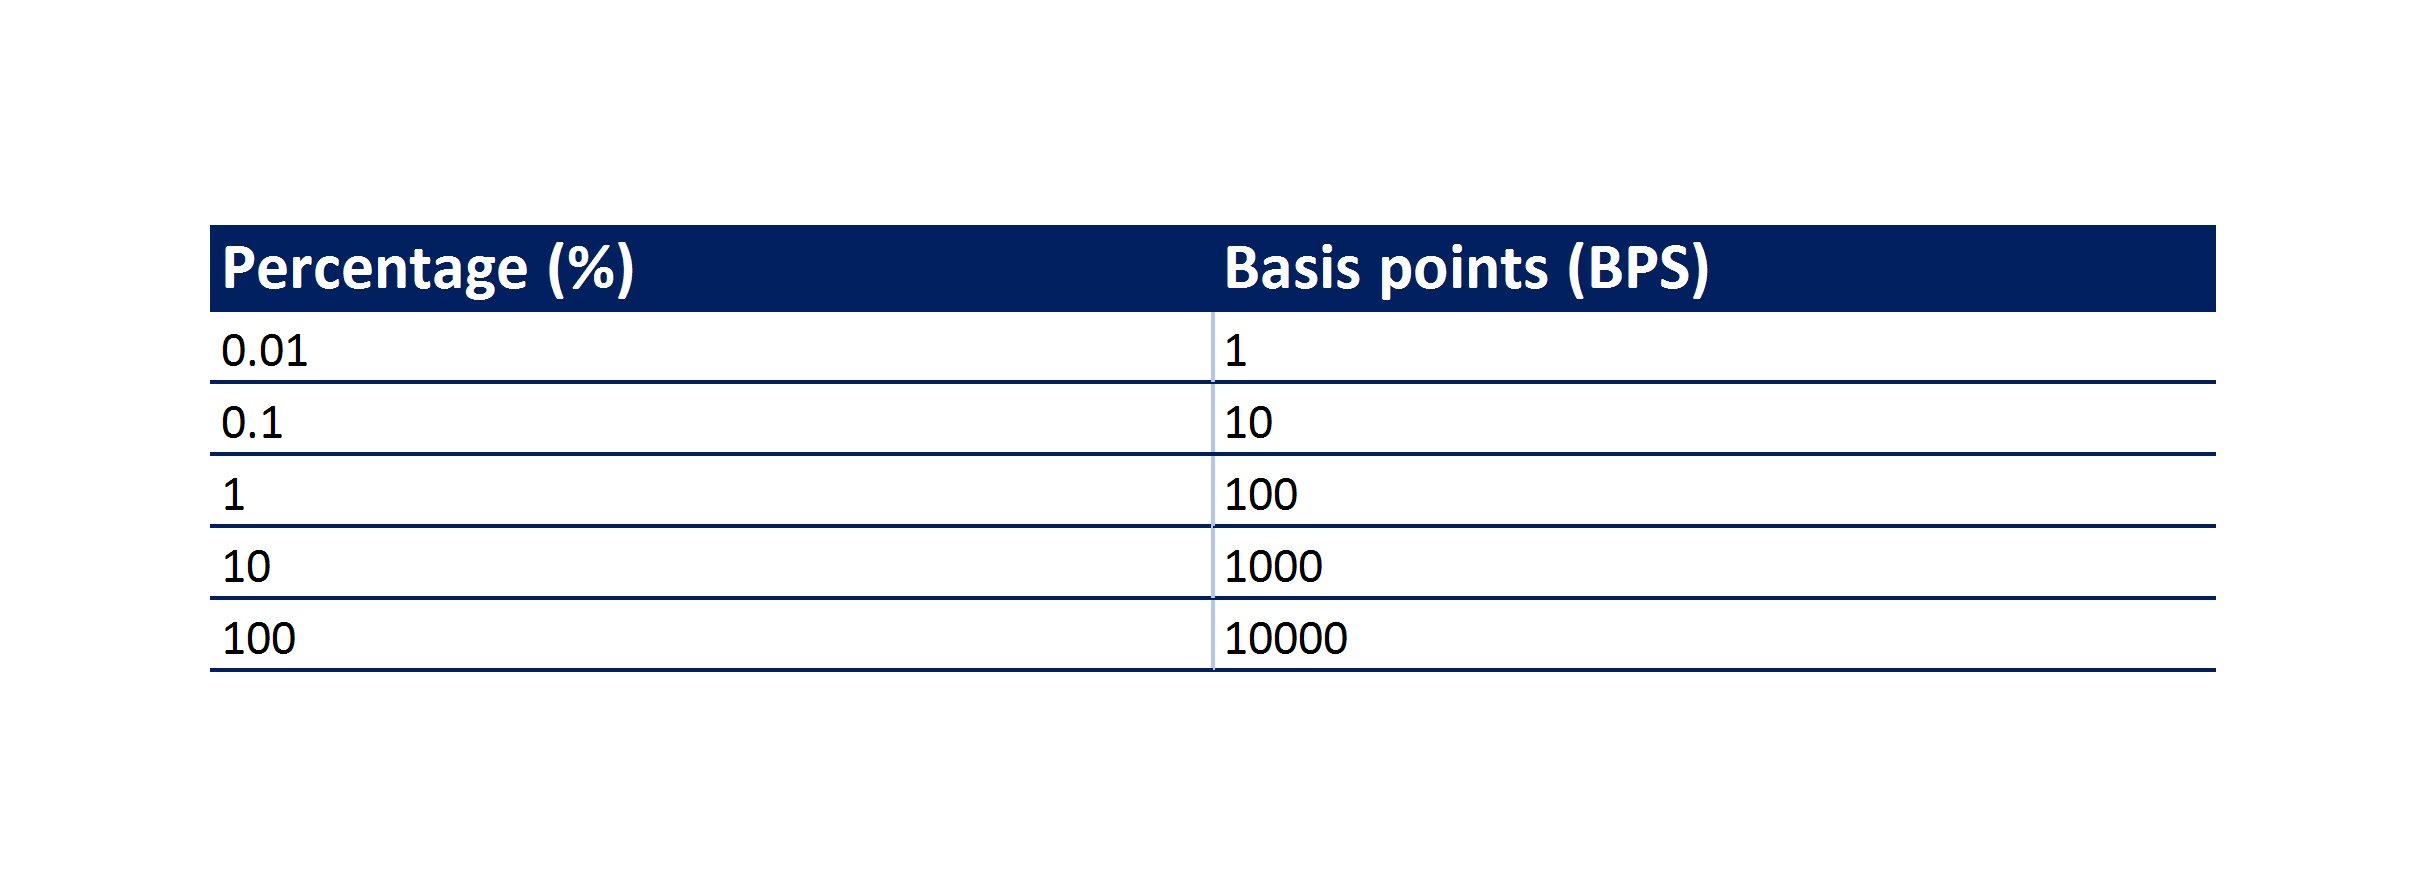 Basis Points